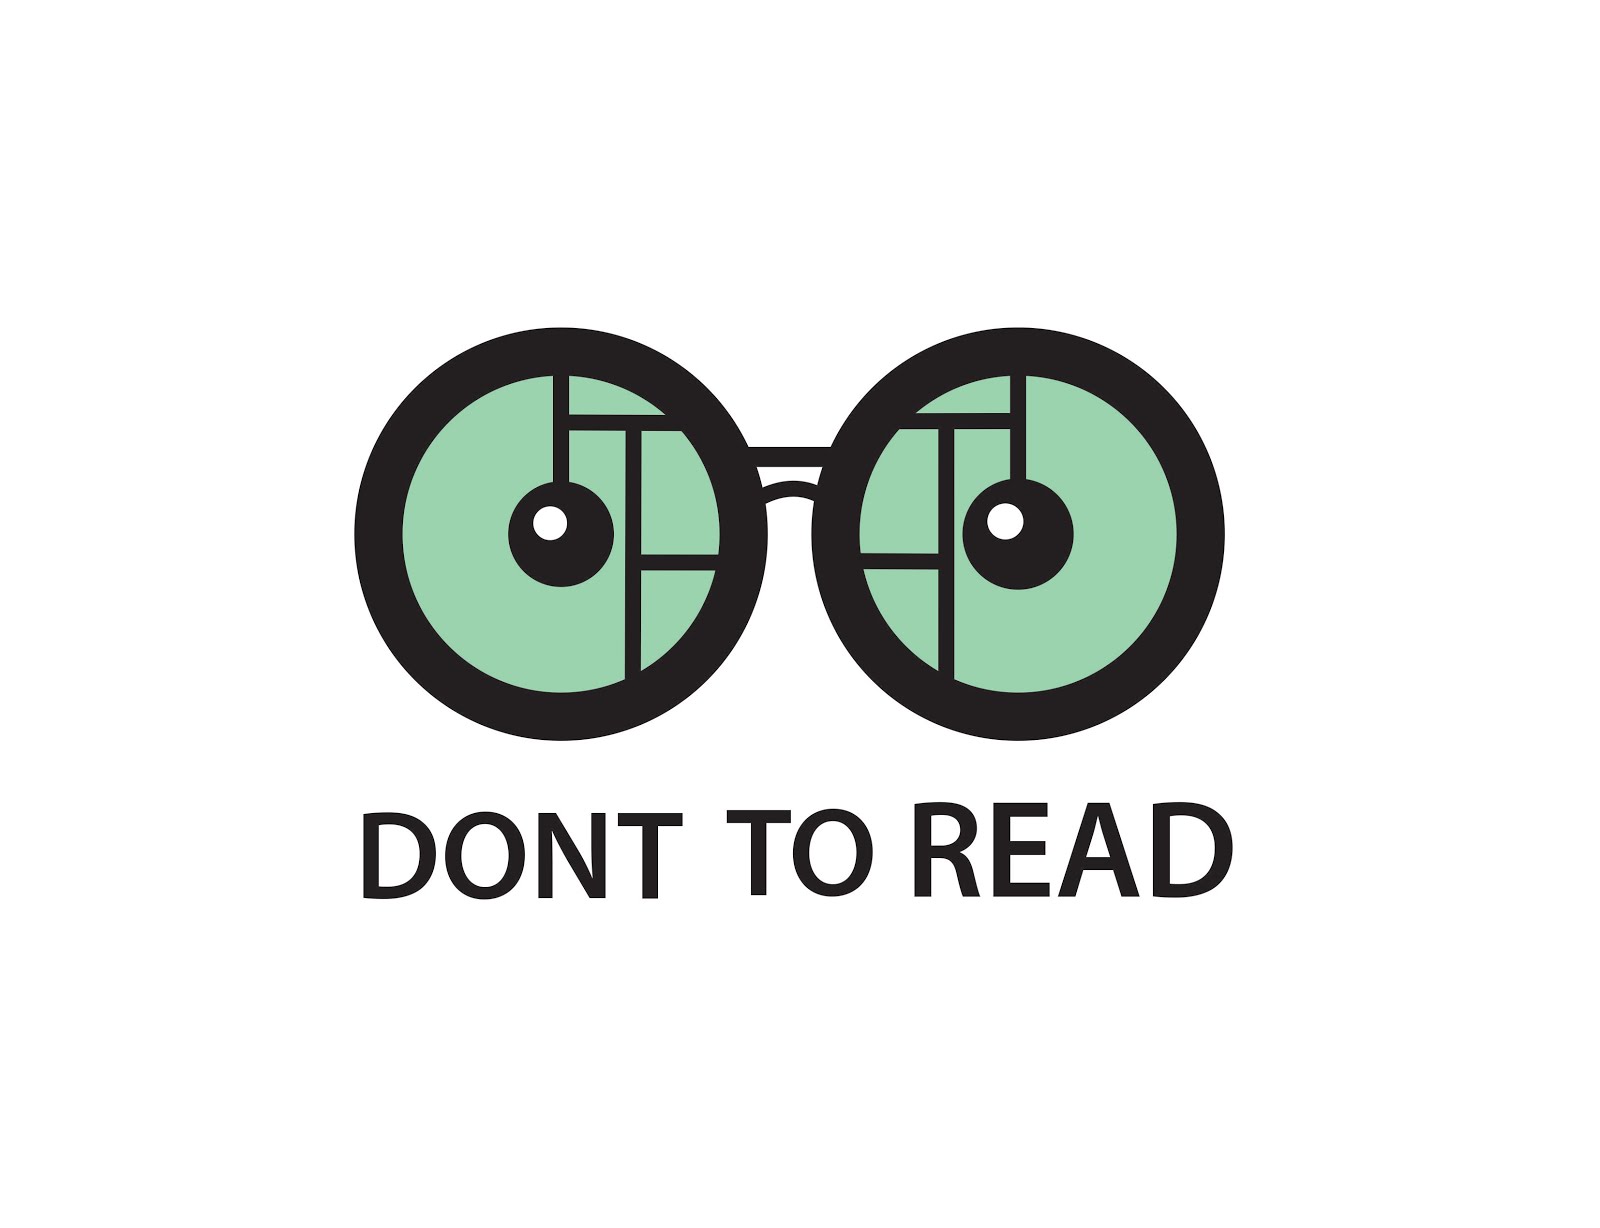 DONT TO READ